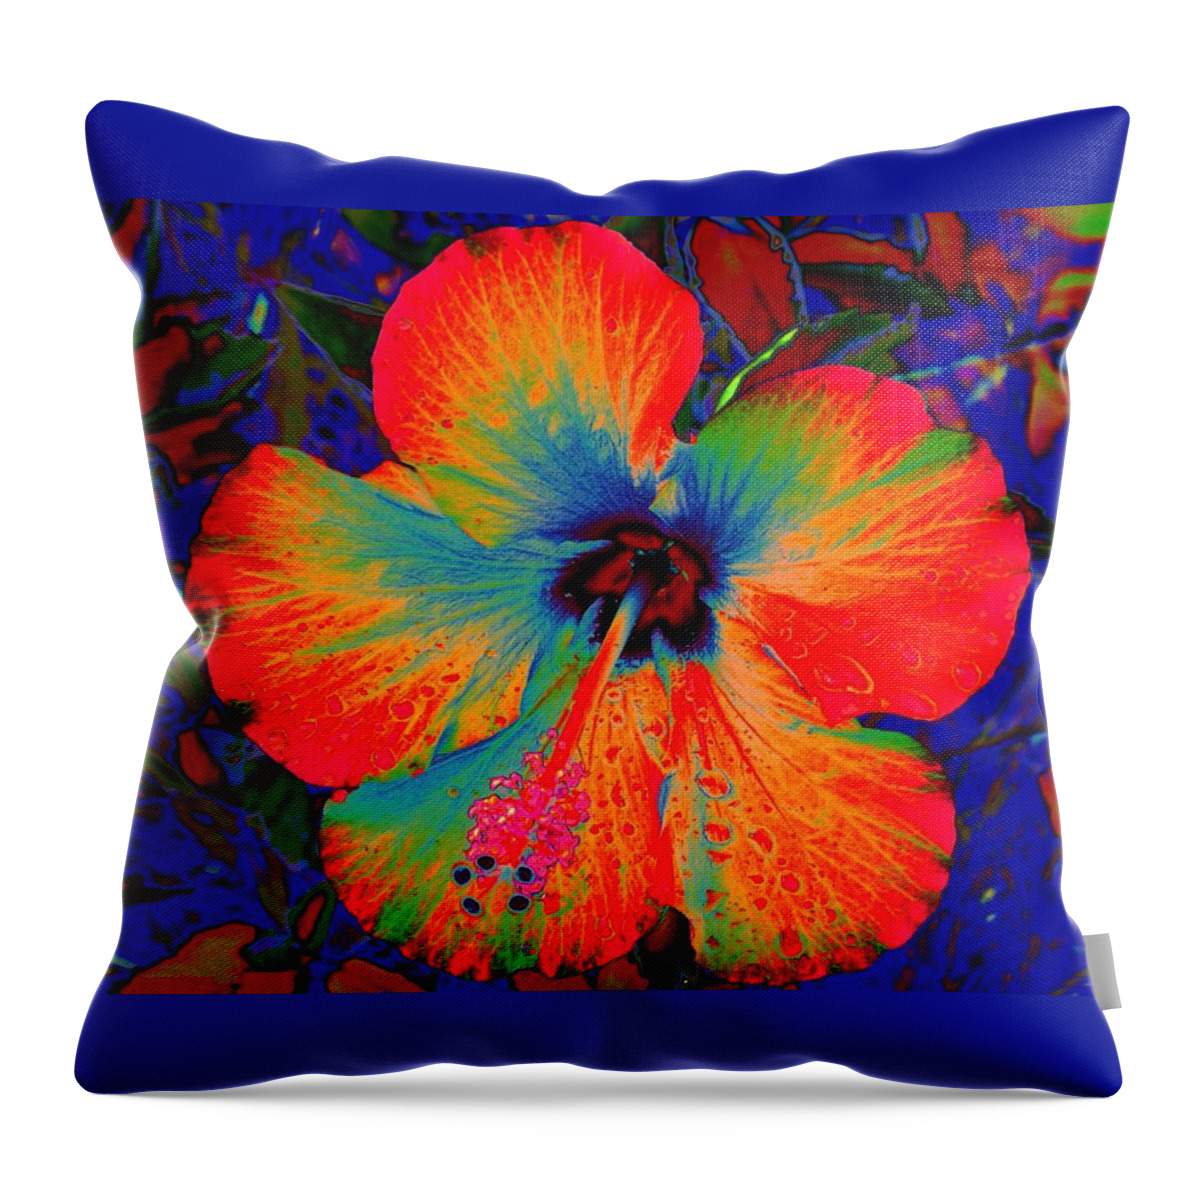 Hibiscus Throw Pillow featuring the digital art Festooned Hibiscus by Larry Beat